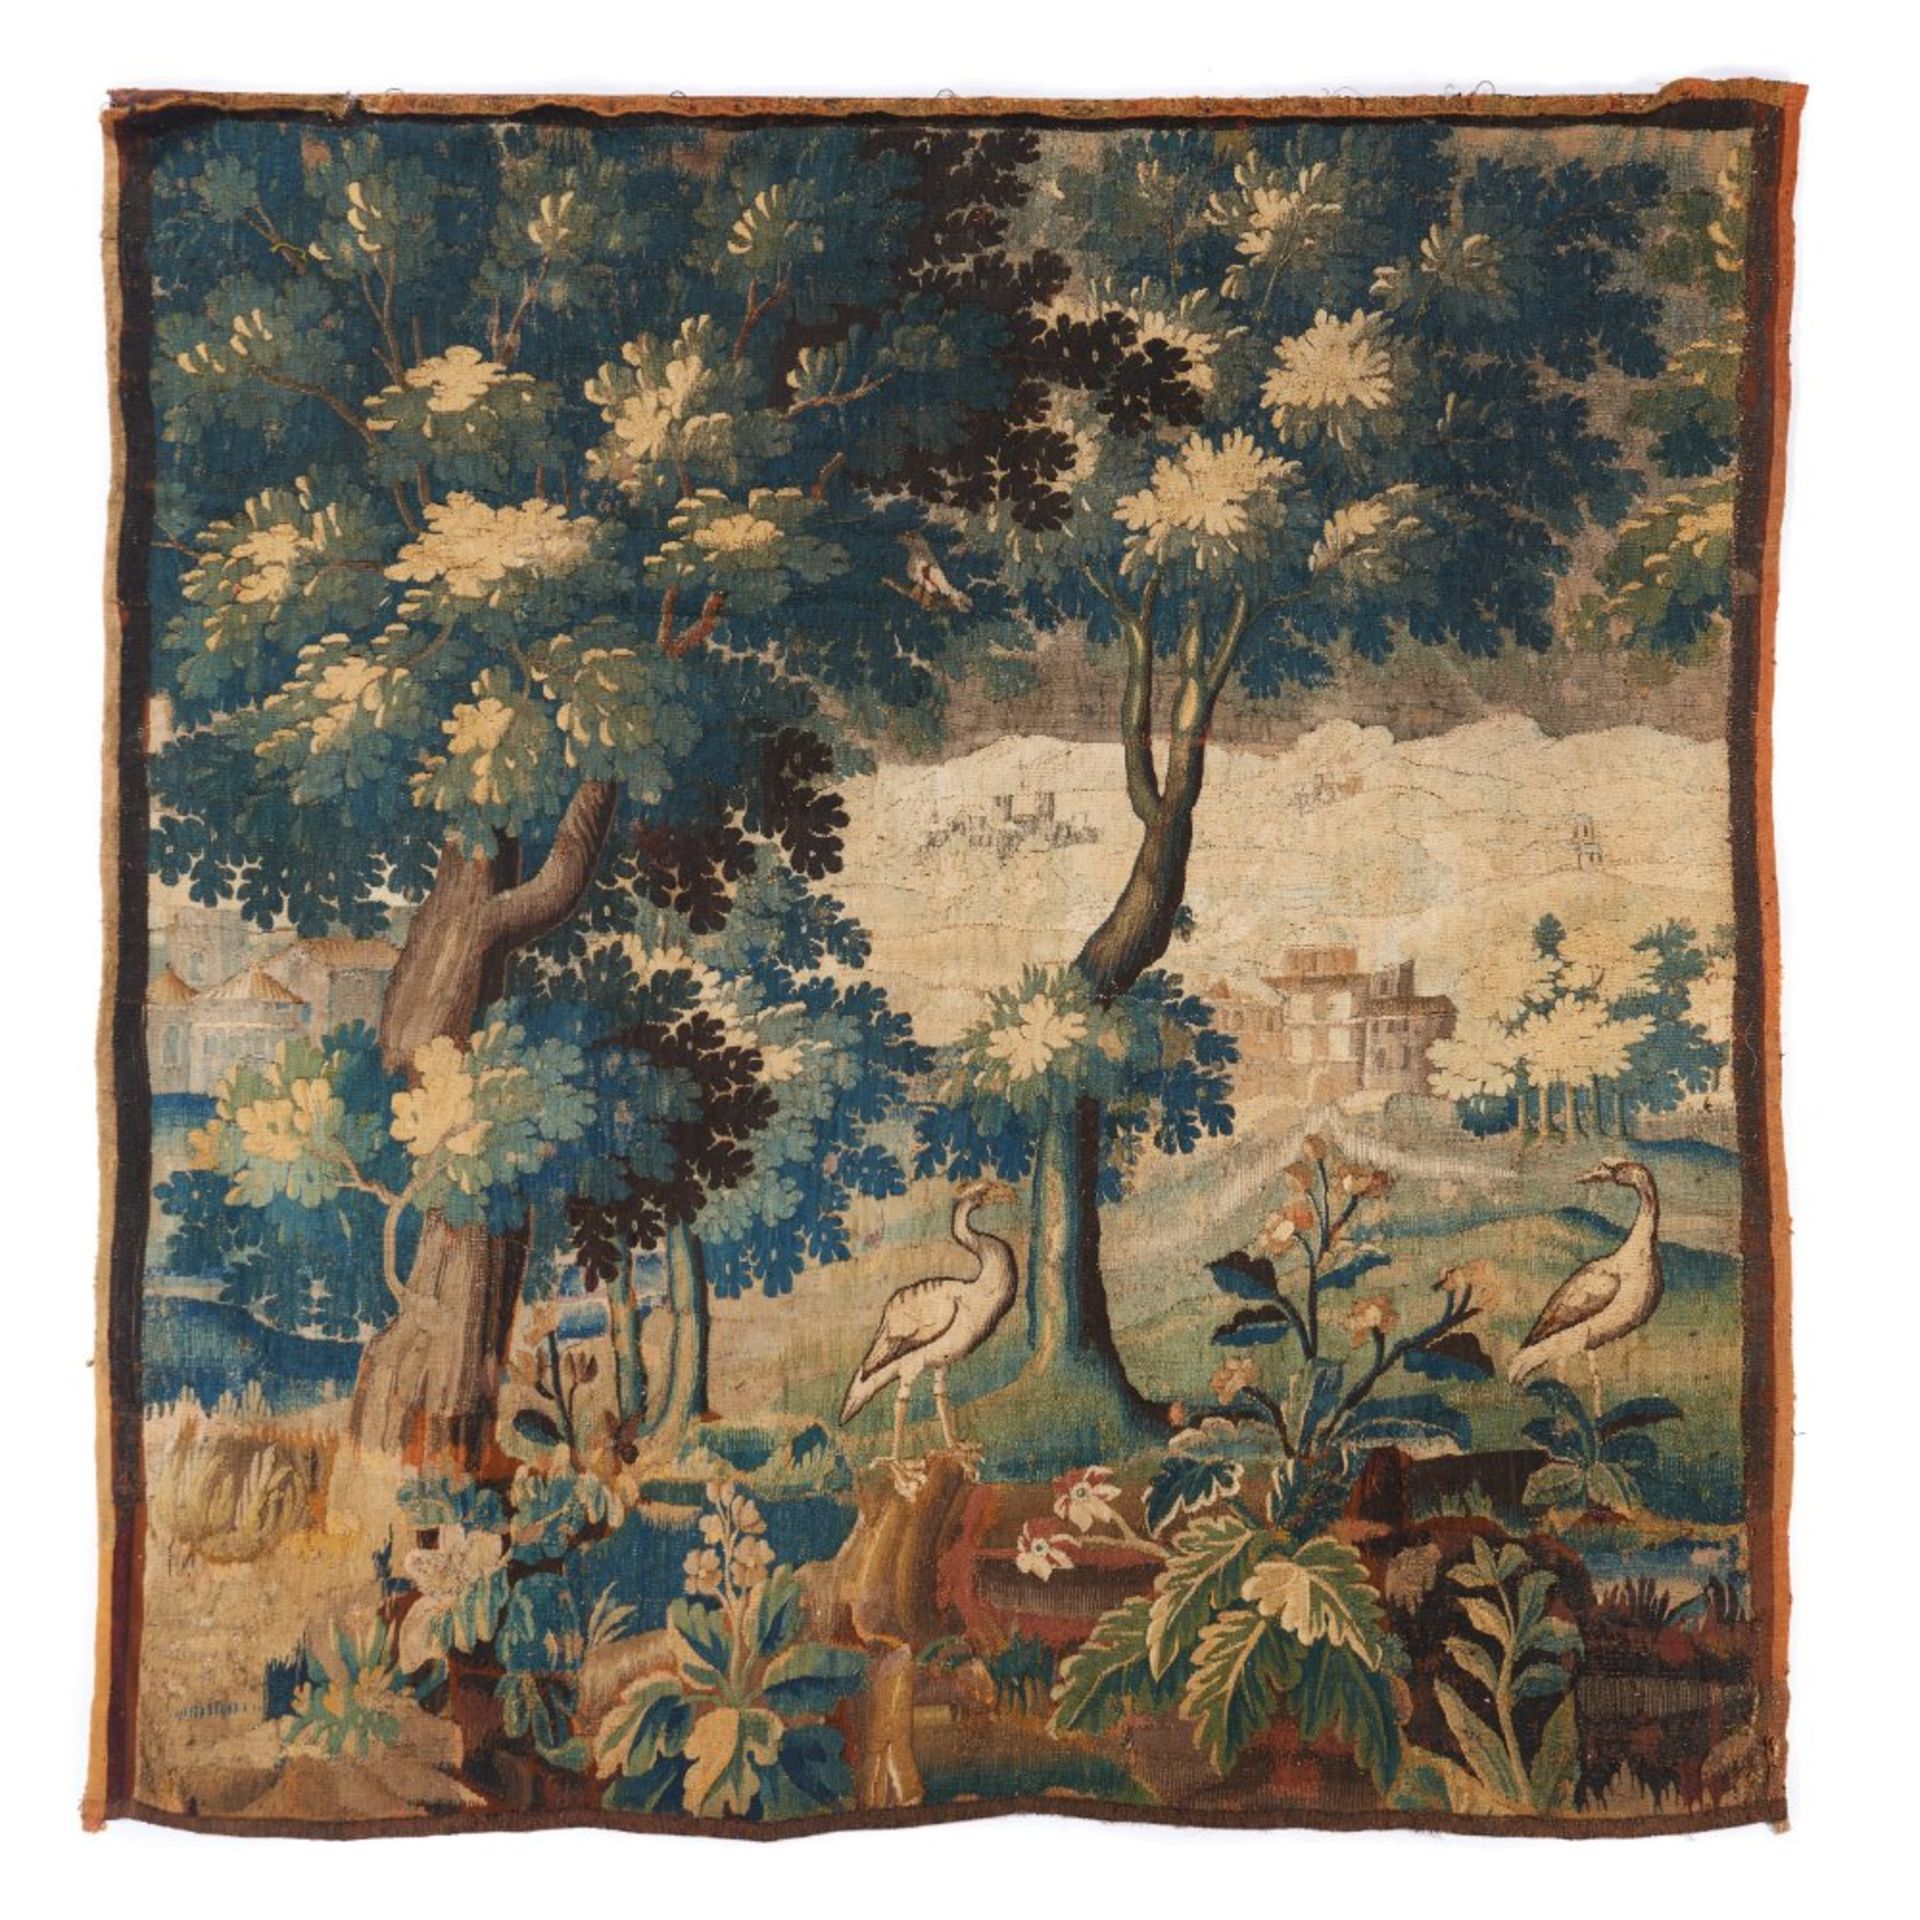 An Aubusson tapestry
Polychrome wools
Representing a landscape with vegetation, birds, and a castle
